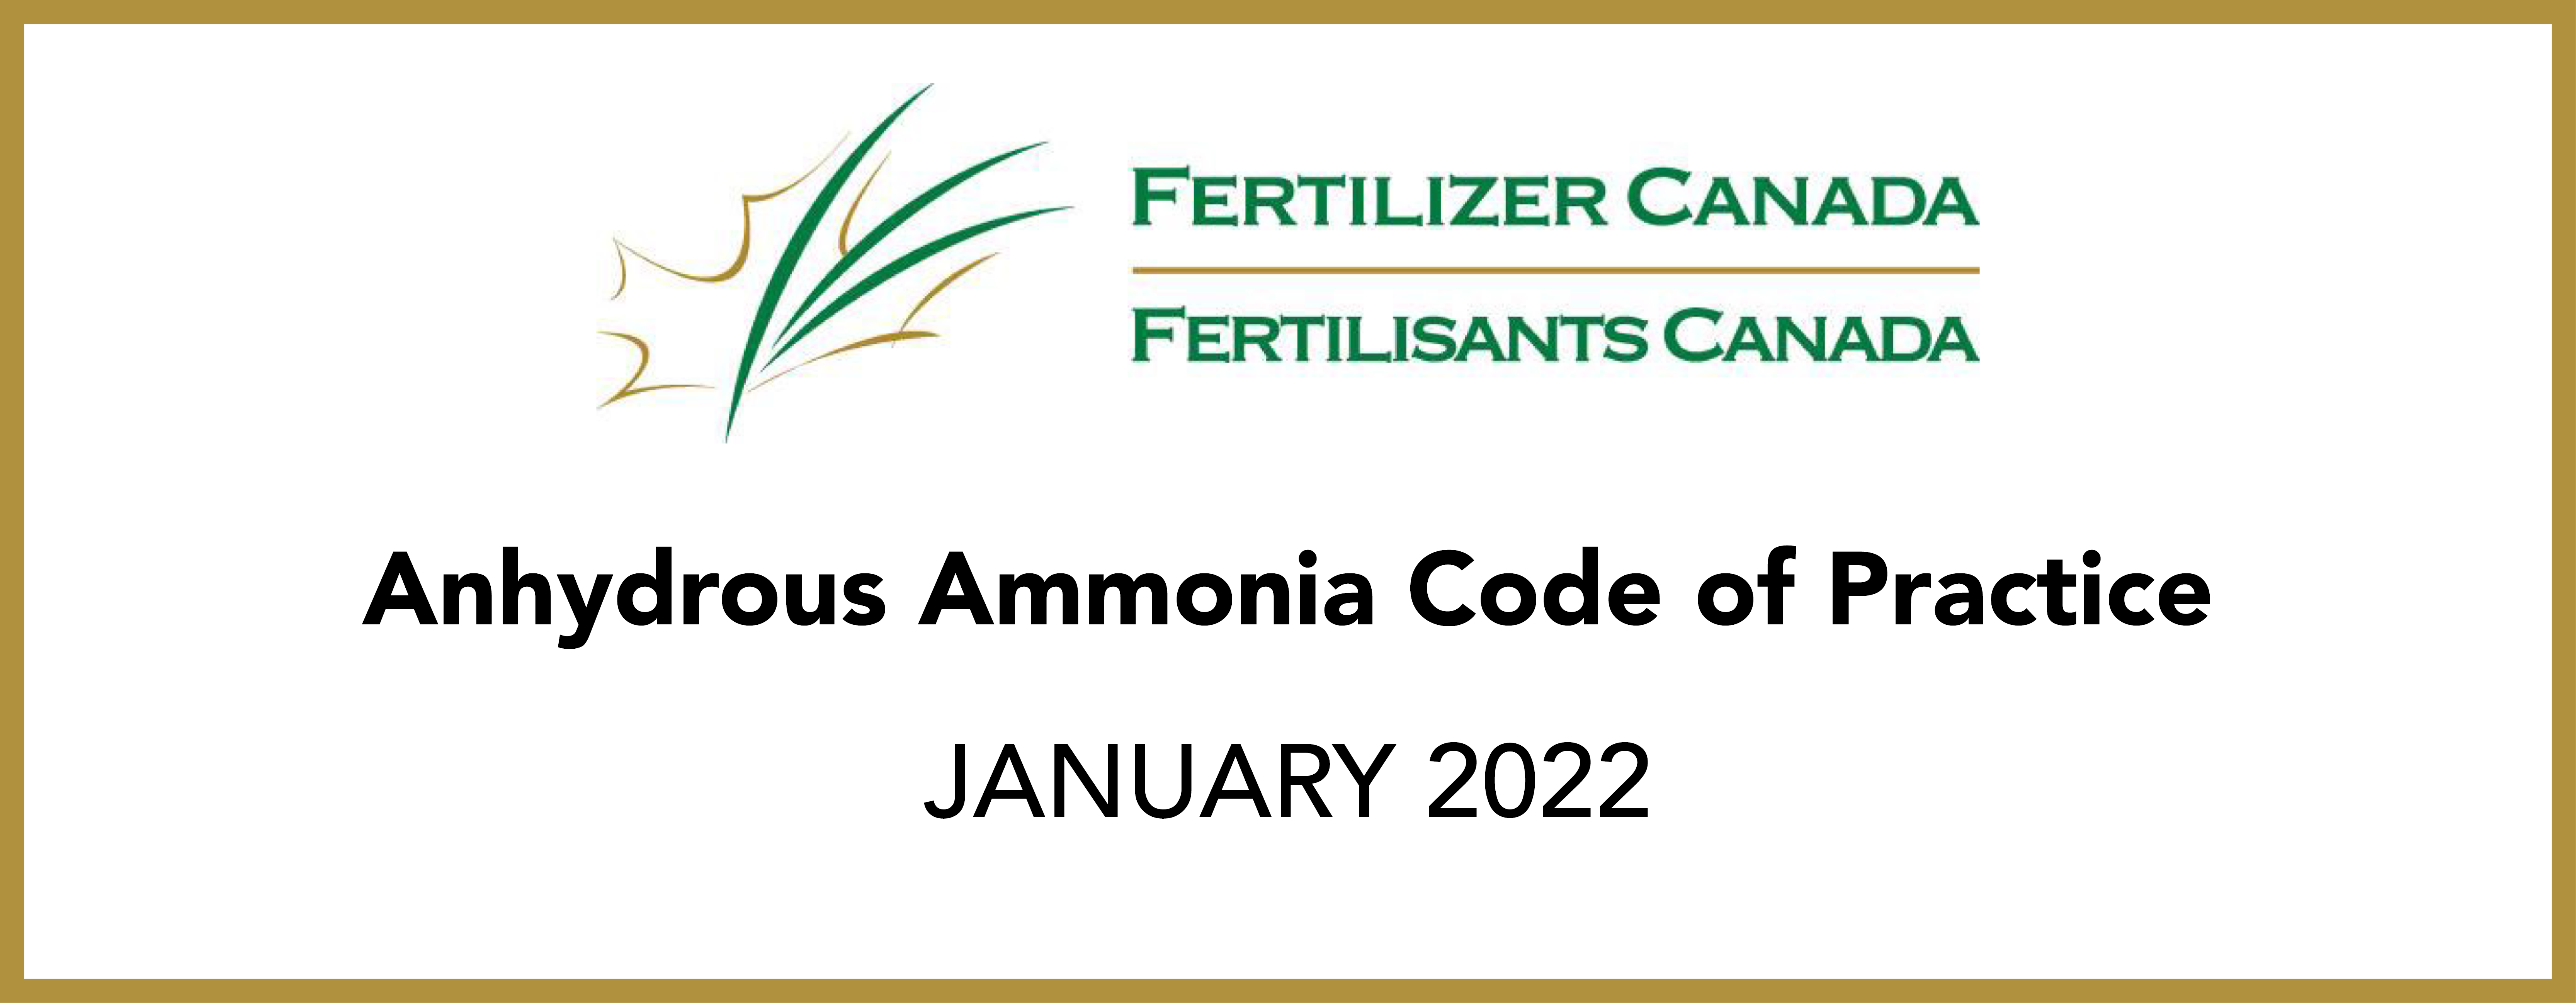 Banner for January 2022 Anhydrous Ammonia Code of Practice 